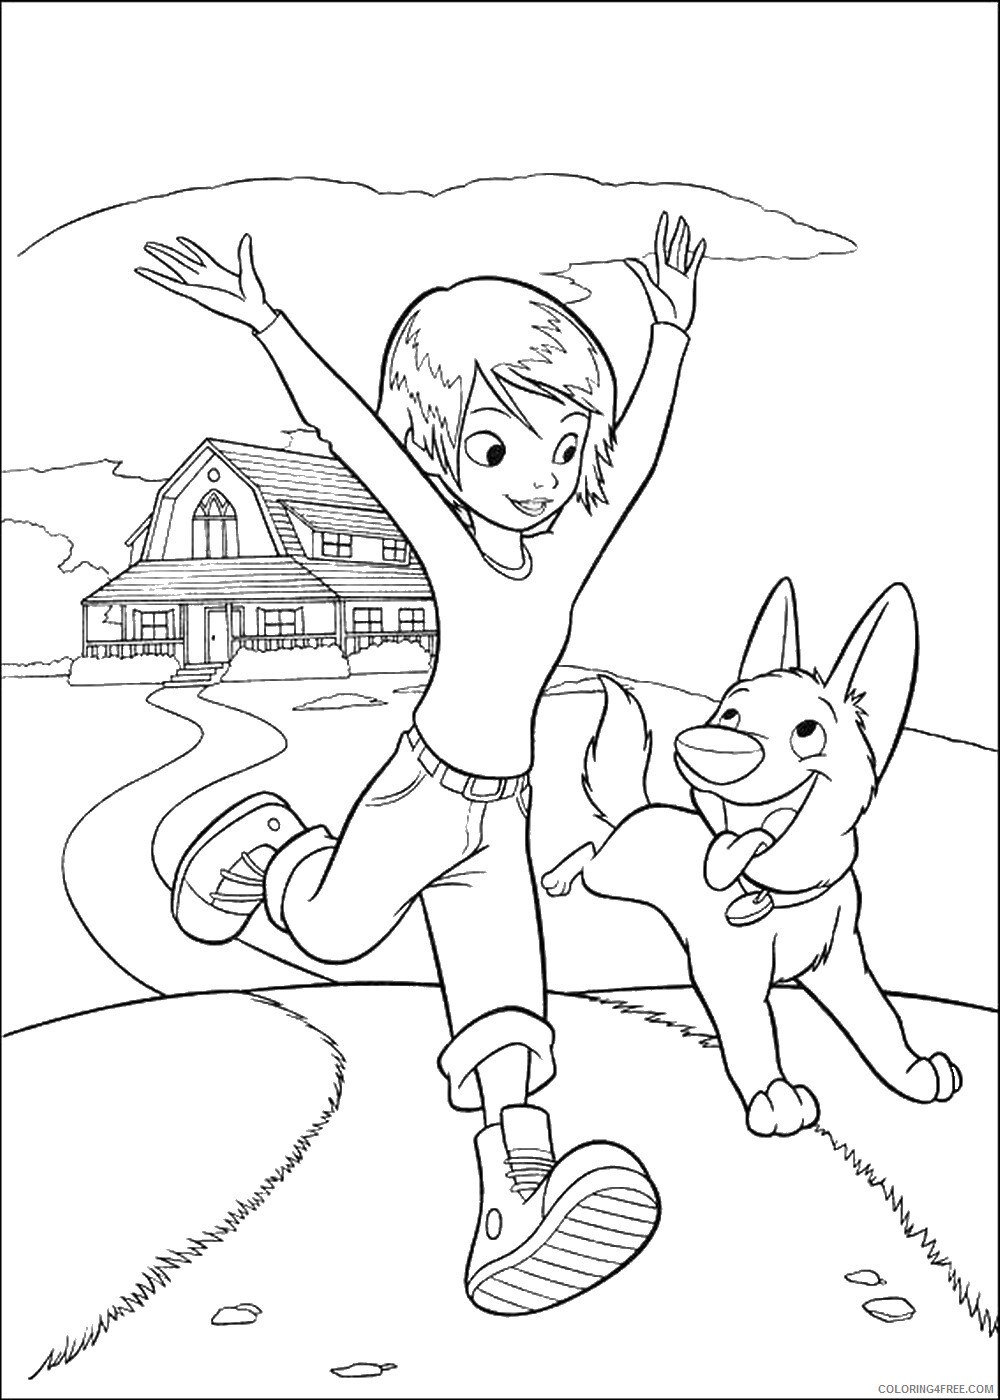 Bolt Coloring Pages TV Film bolt_cl_11 Printable 2020 01172 Coloring4free